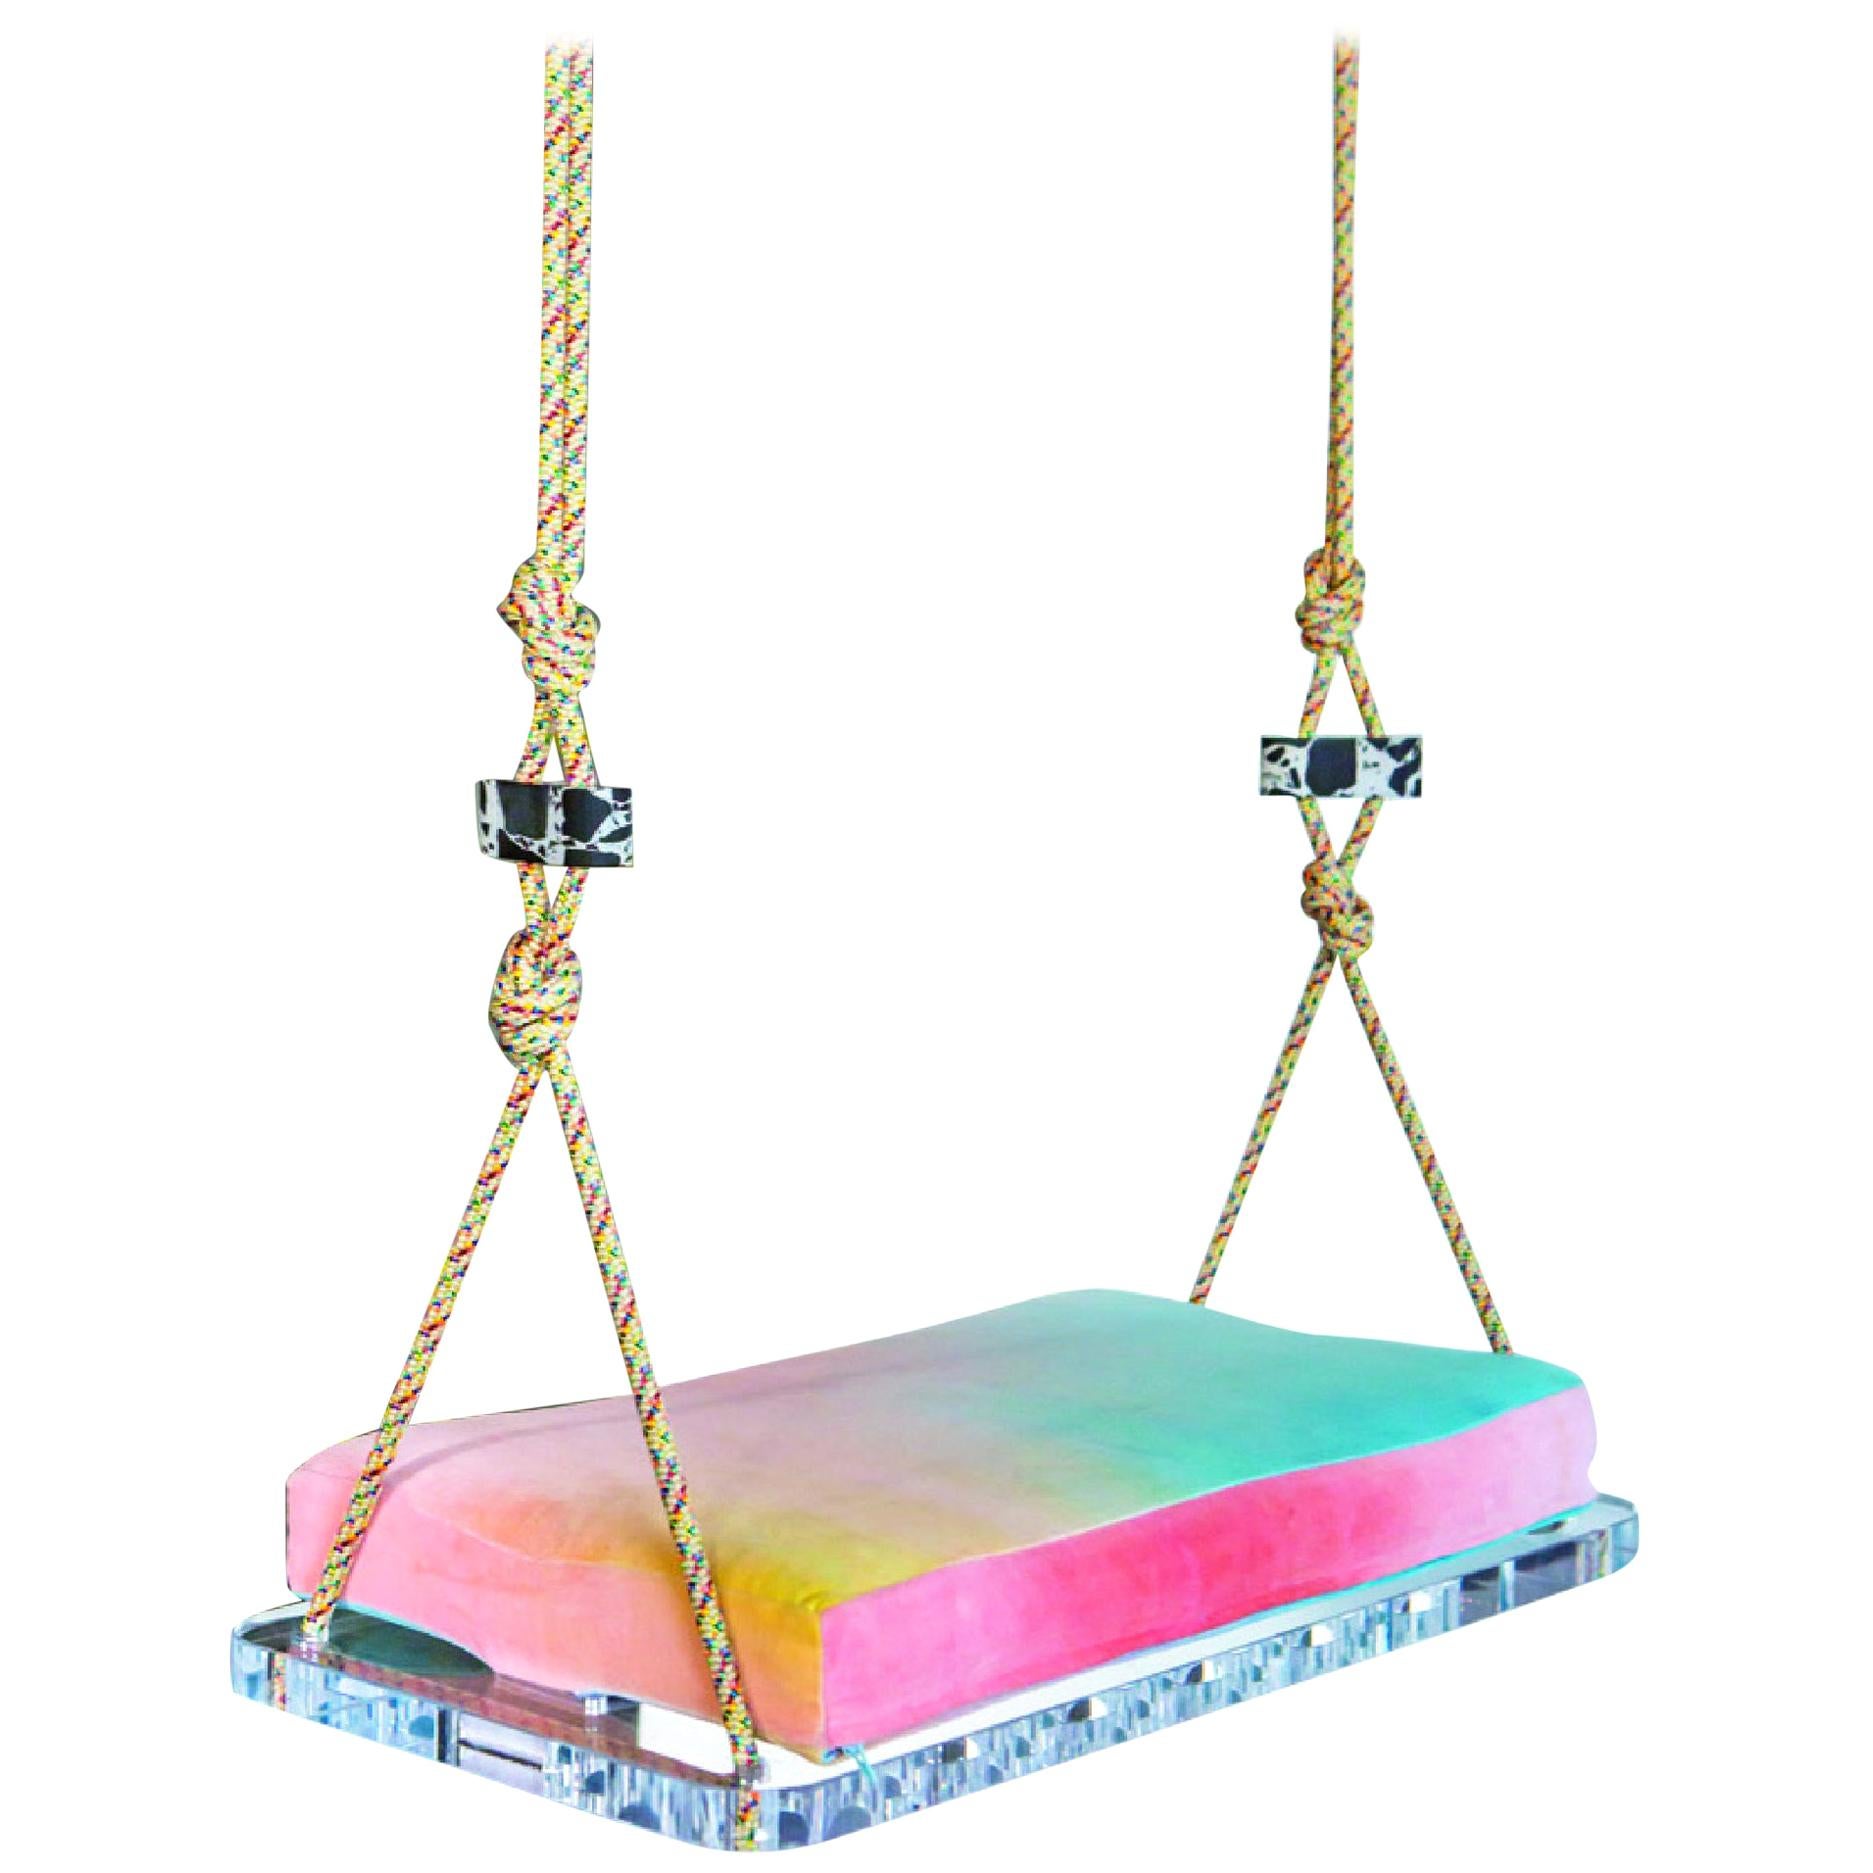 Sno-Cone Indoor Swing, Single Seater in Hand Dyed Cotton Velvet